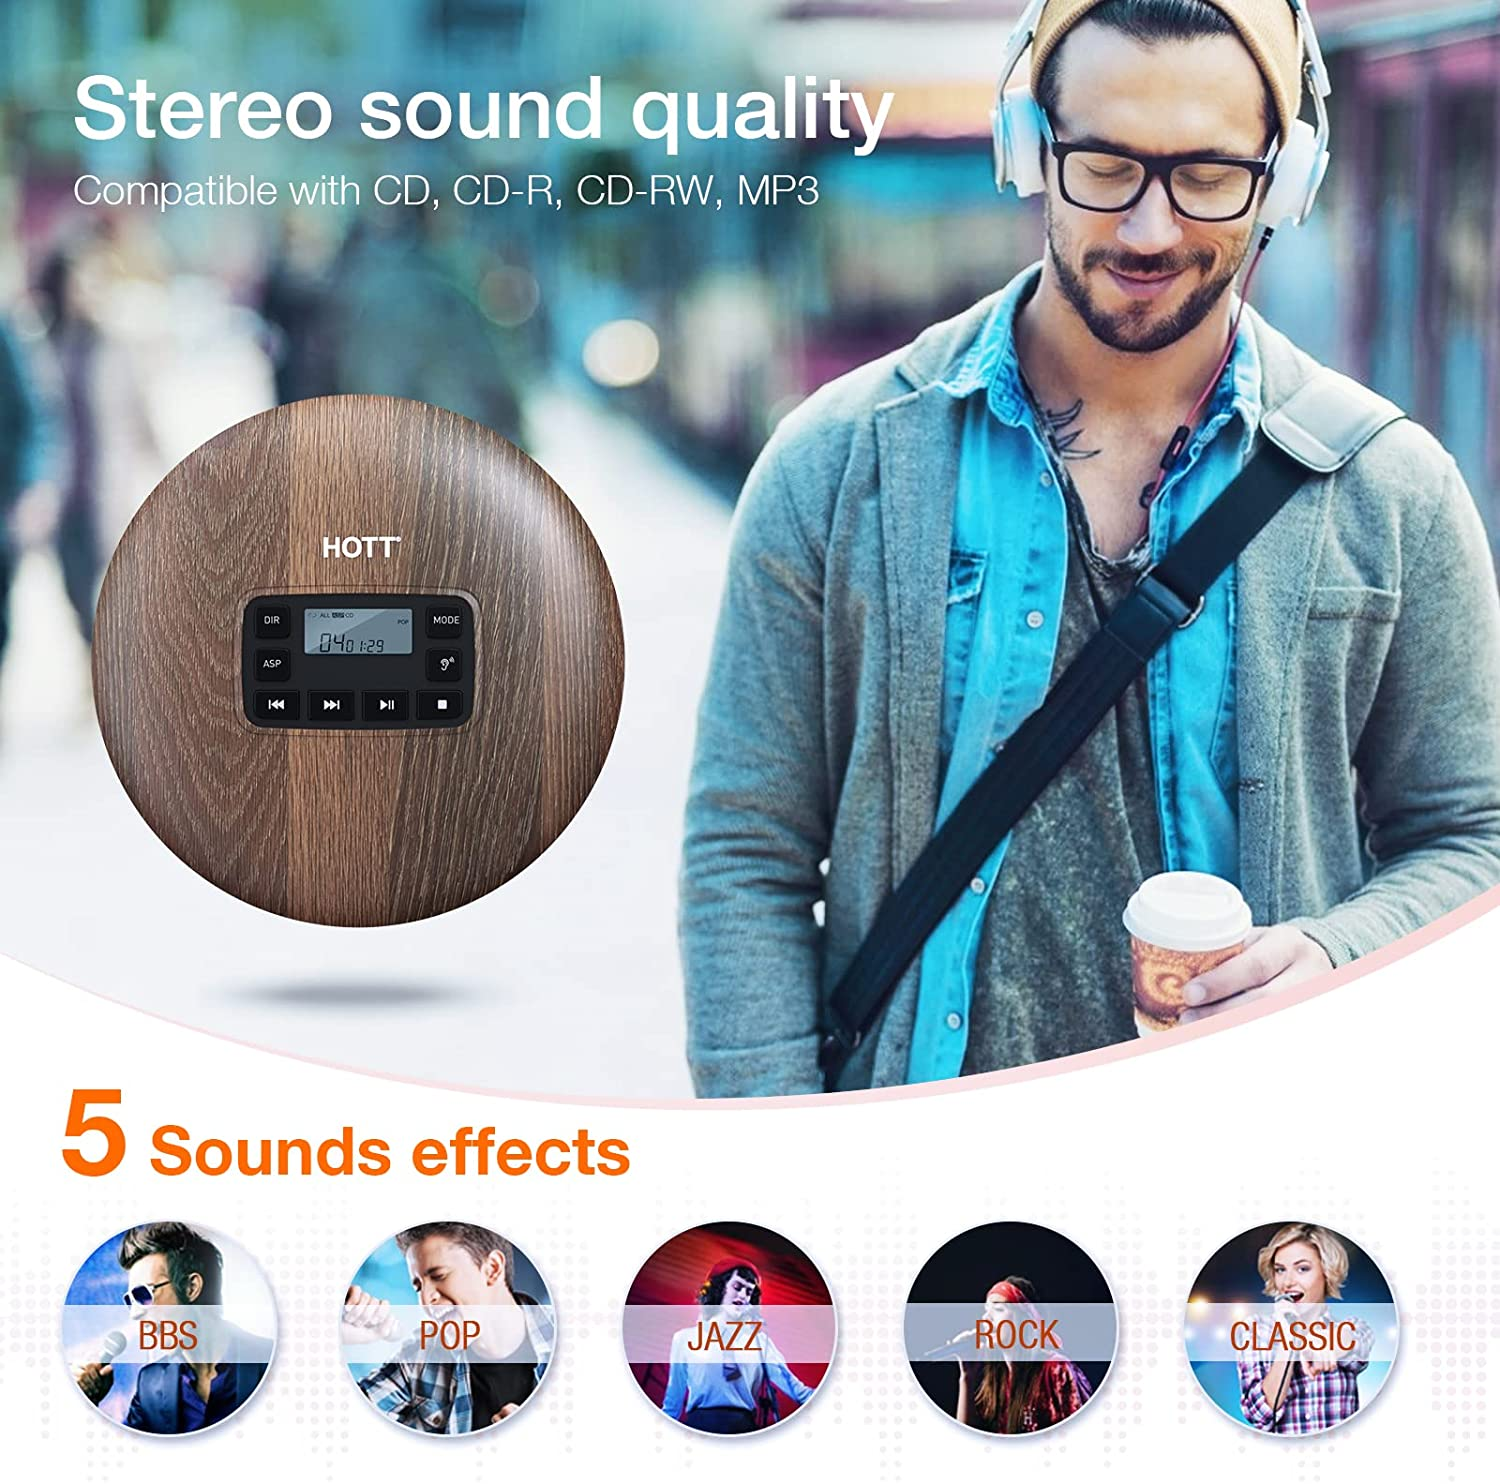 HOTT Portable CD Player CD611 Small Walkman CD Player with Stereo Headphones USB Cable LED Display Anti-Skip Anti-Shock Personal Compact Disc Music Player Wood - image 3 of 6